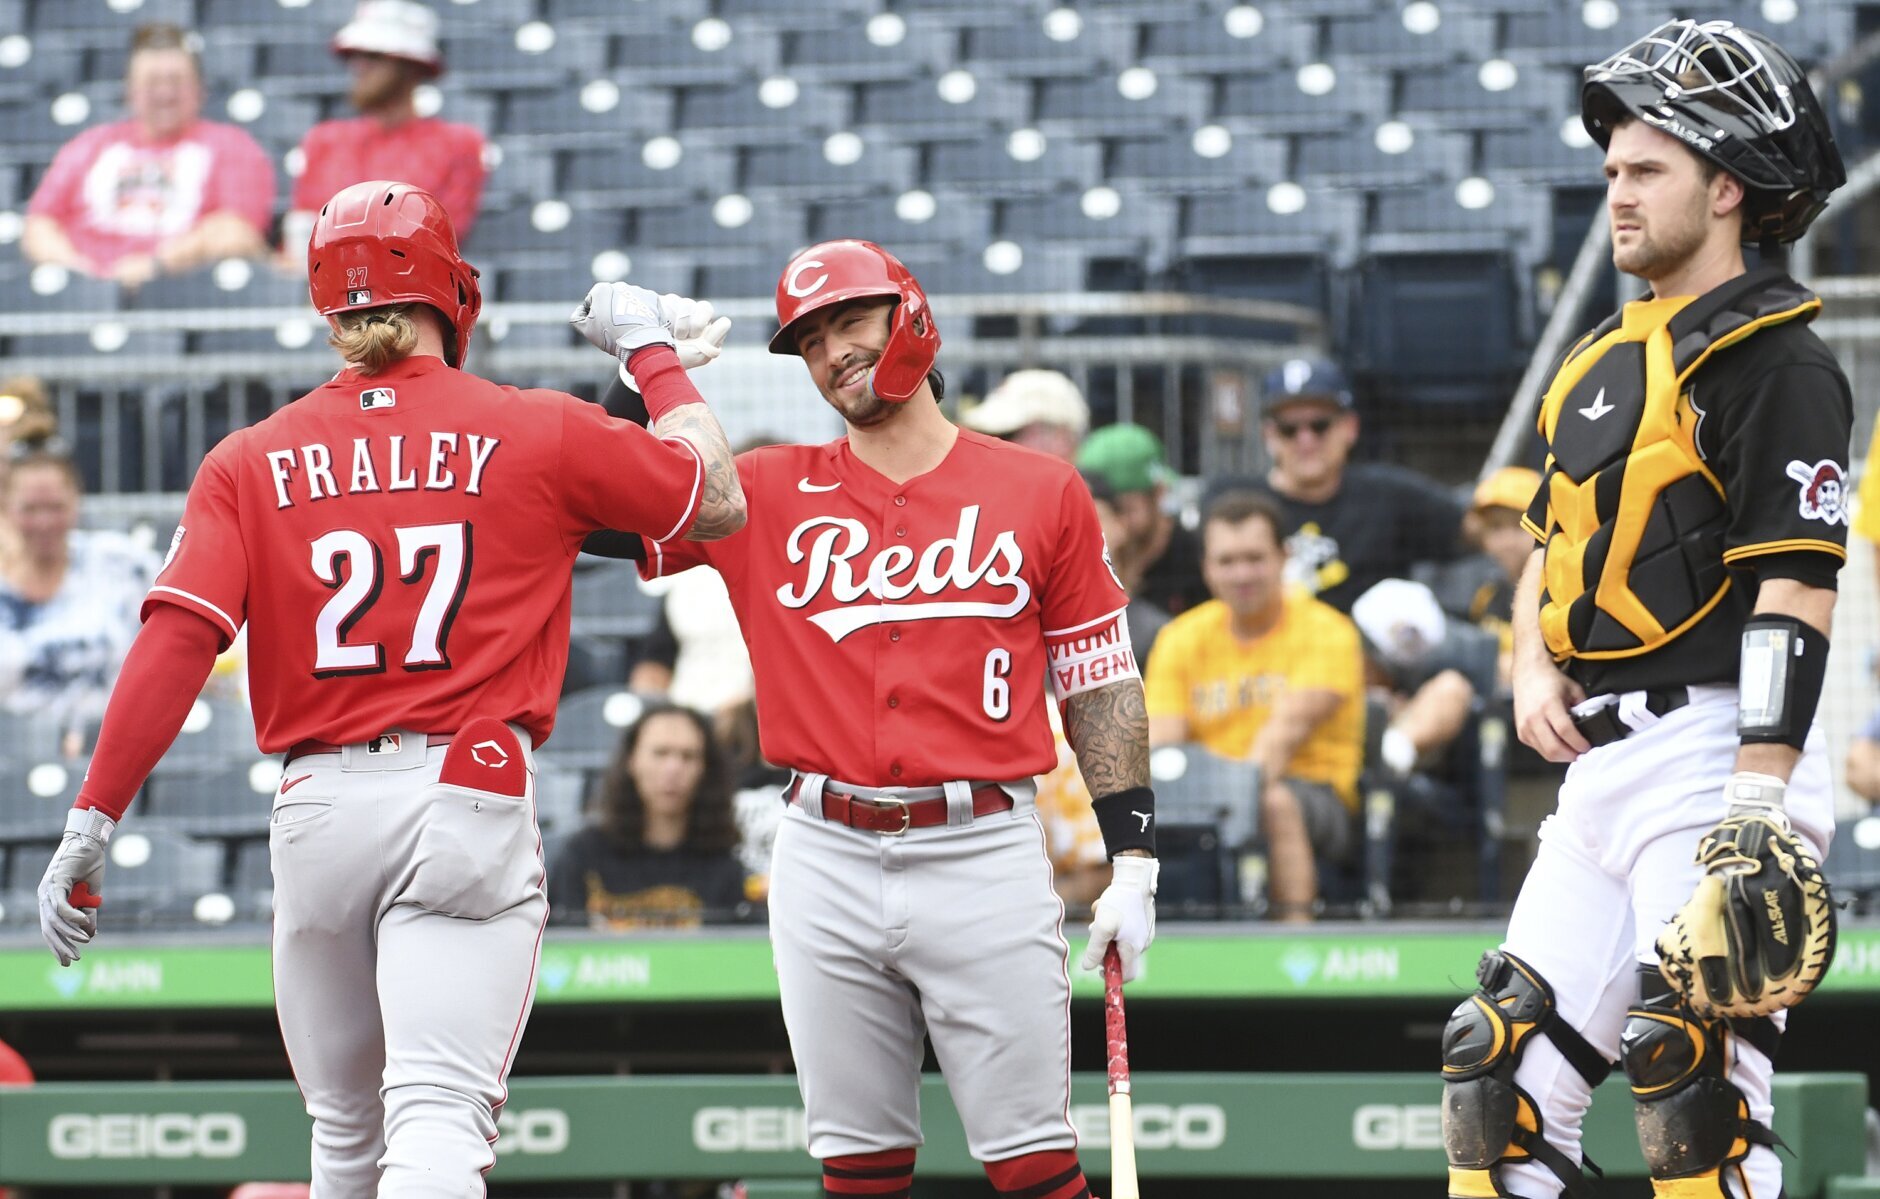 Fraley tallies 3 RBIs, scores 4 times; Reds top Pirates 9-5 - WTOP